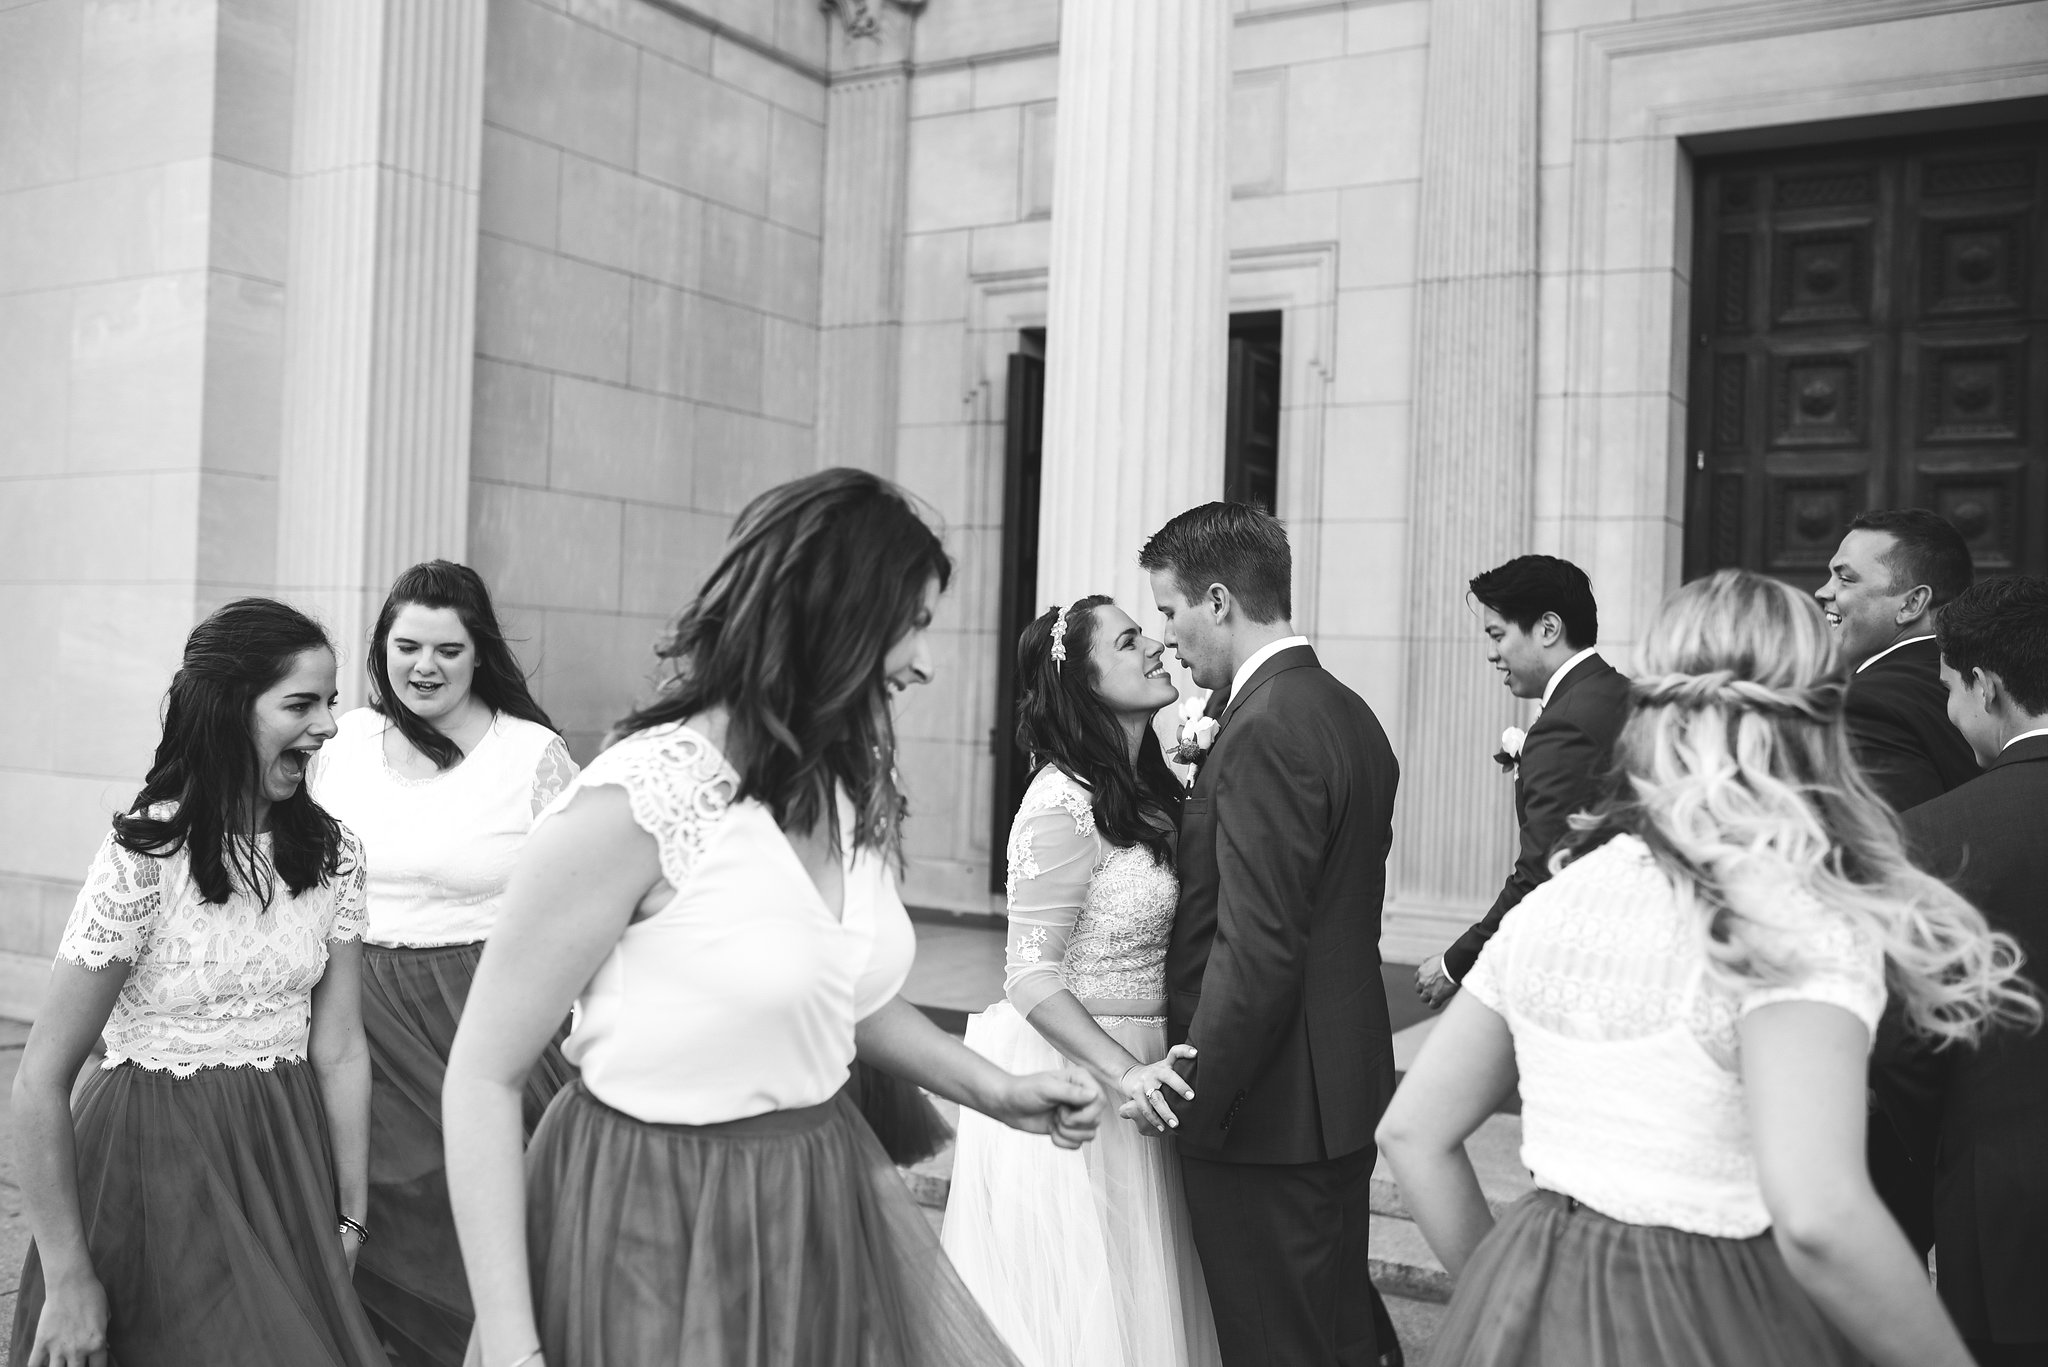  Baltimore, Canton, Church Wedding, Modern, Outdoors, Maryland Wedding Photographer, Romantic, Classic, St. Casimir Church, Bride and groom holding each other and smiling while encircled by wedding party, black and white photo 